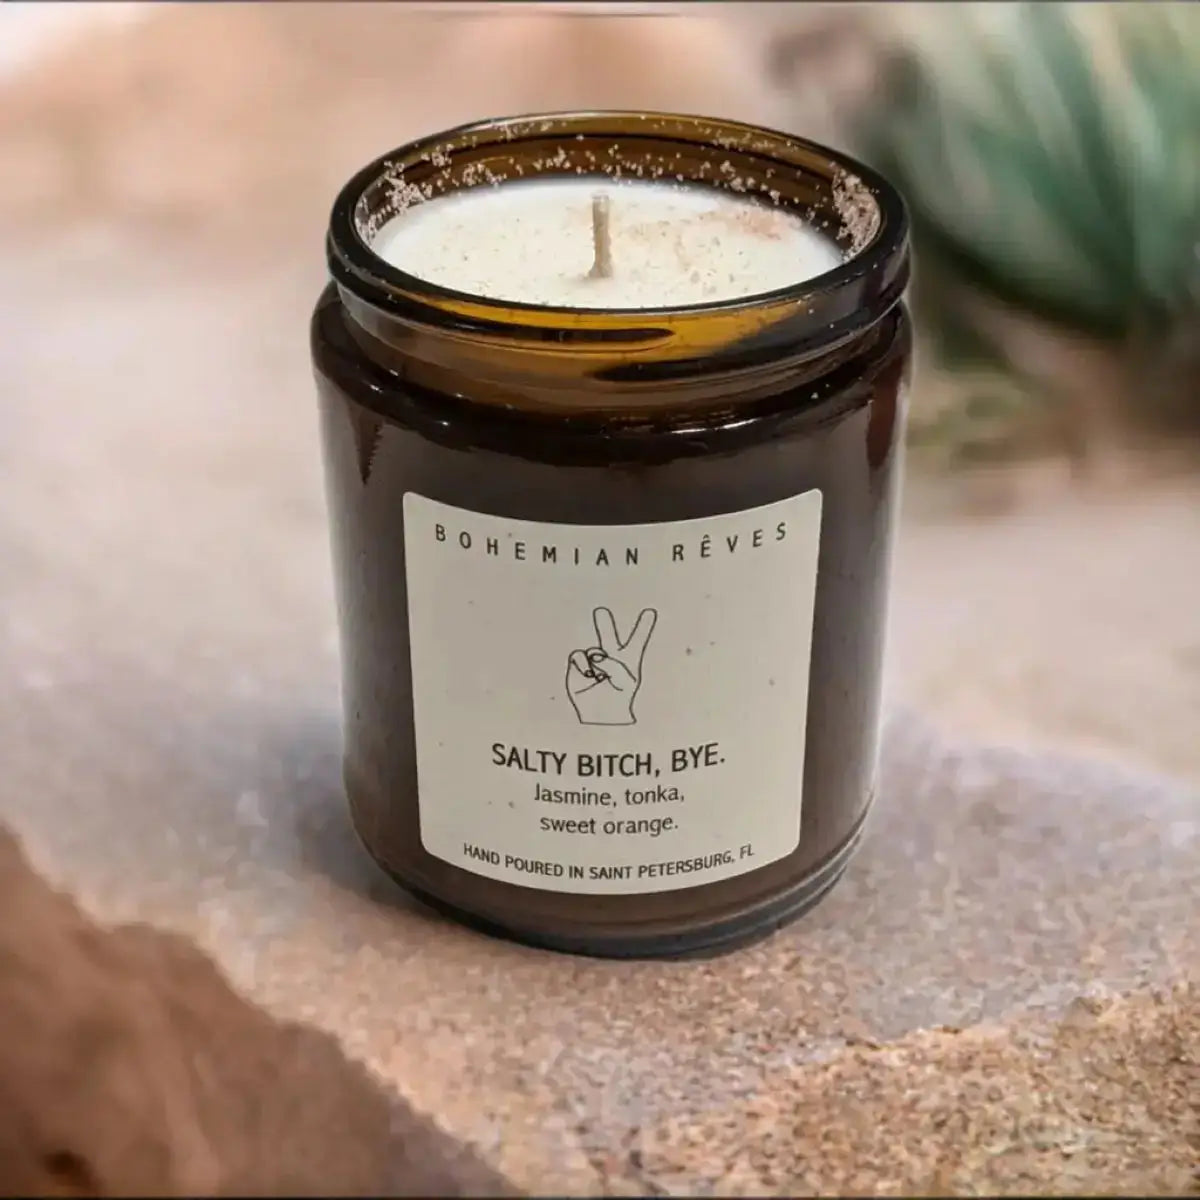 Bohemian Rêves Salty Bitch Bye Soy Wax Intention Candle